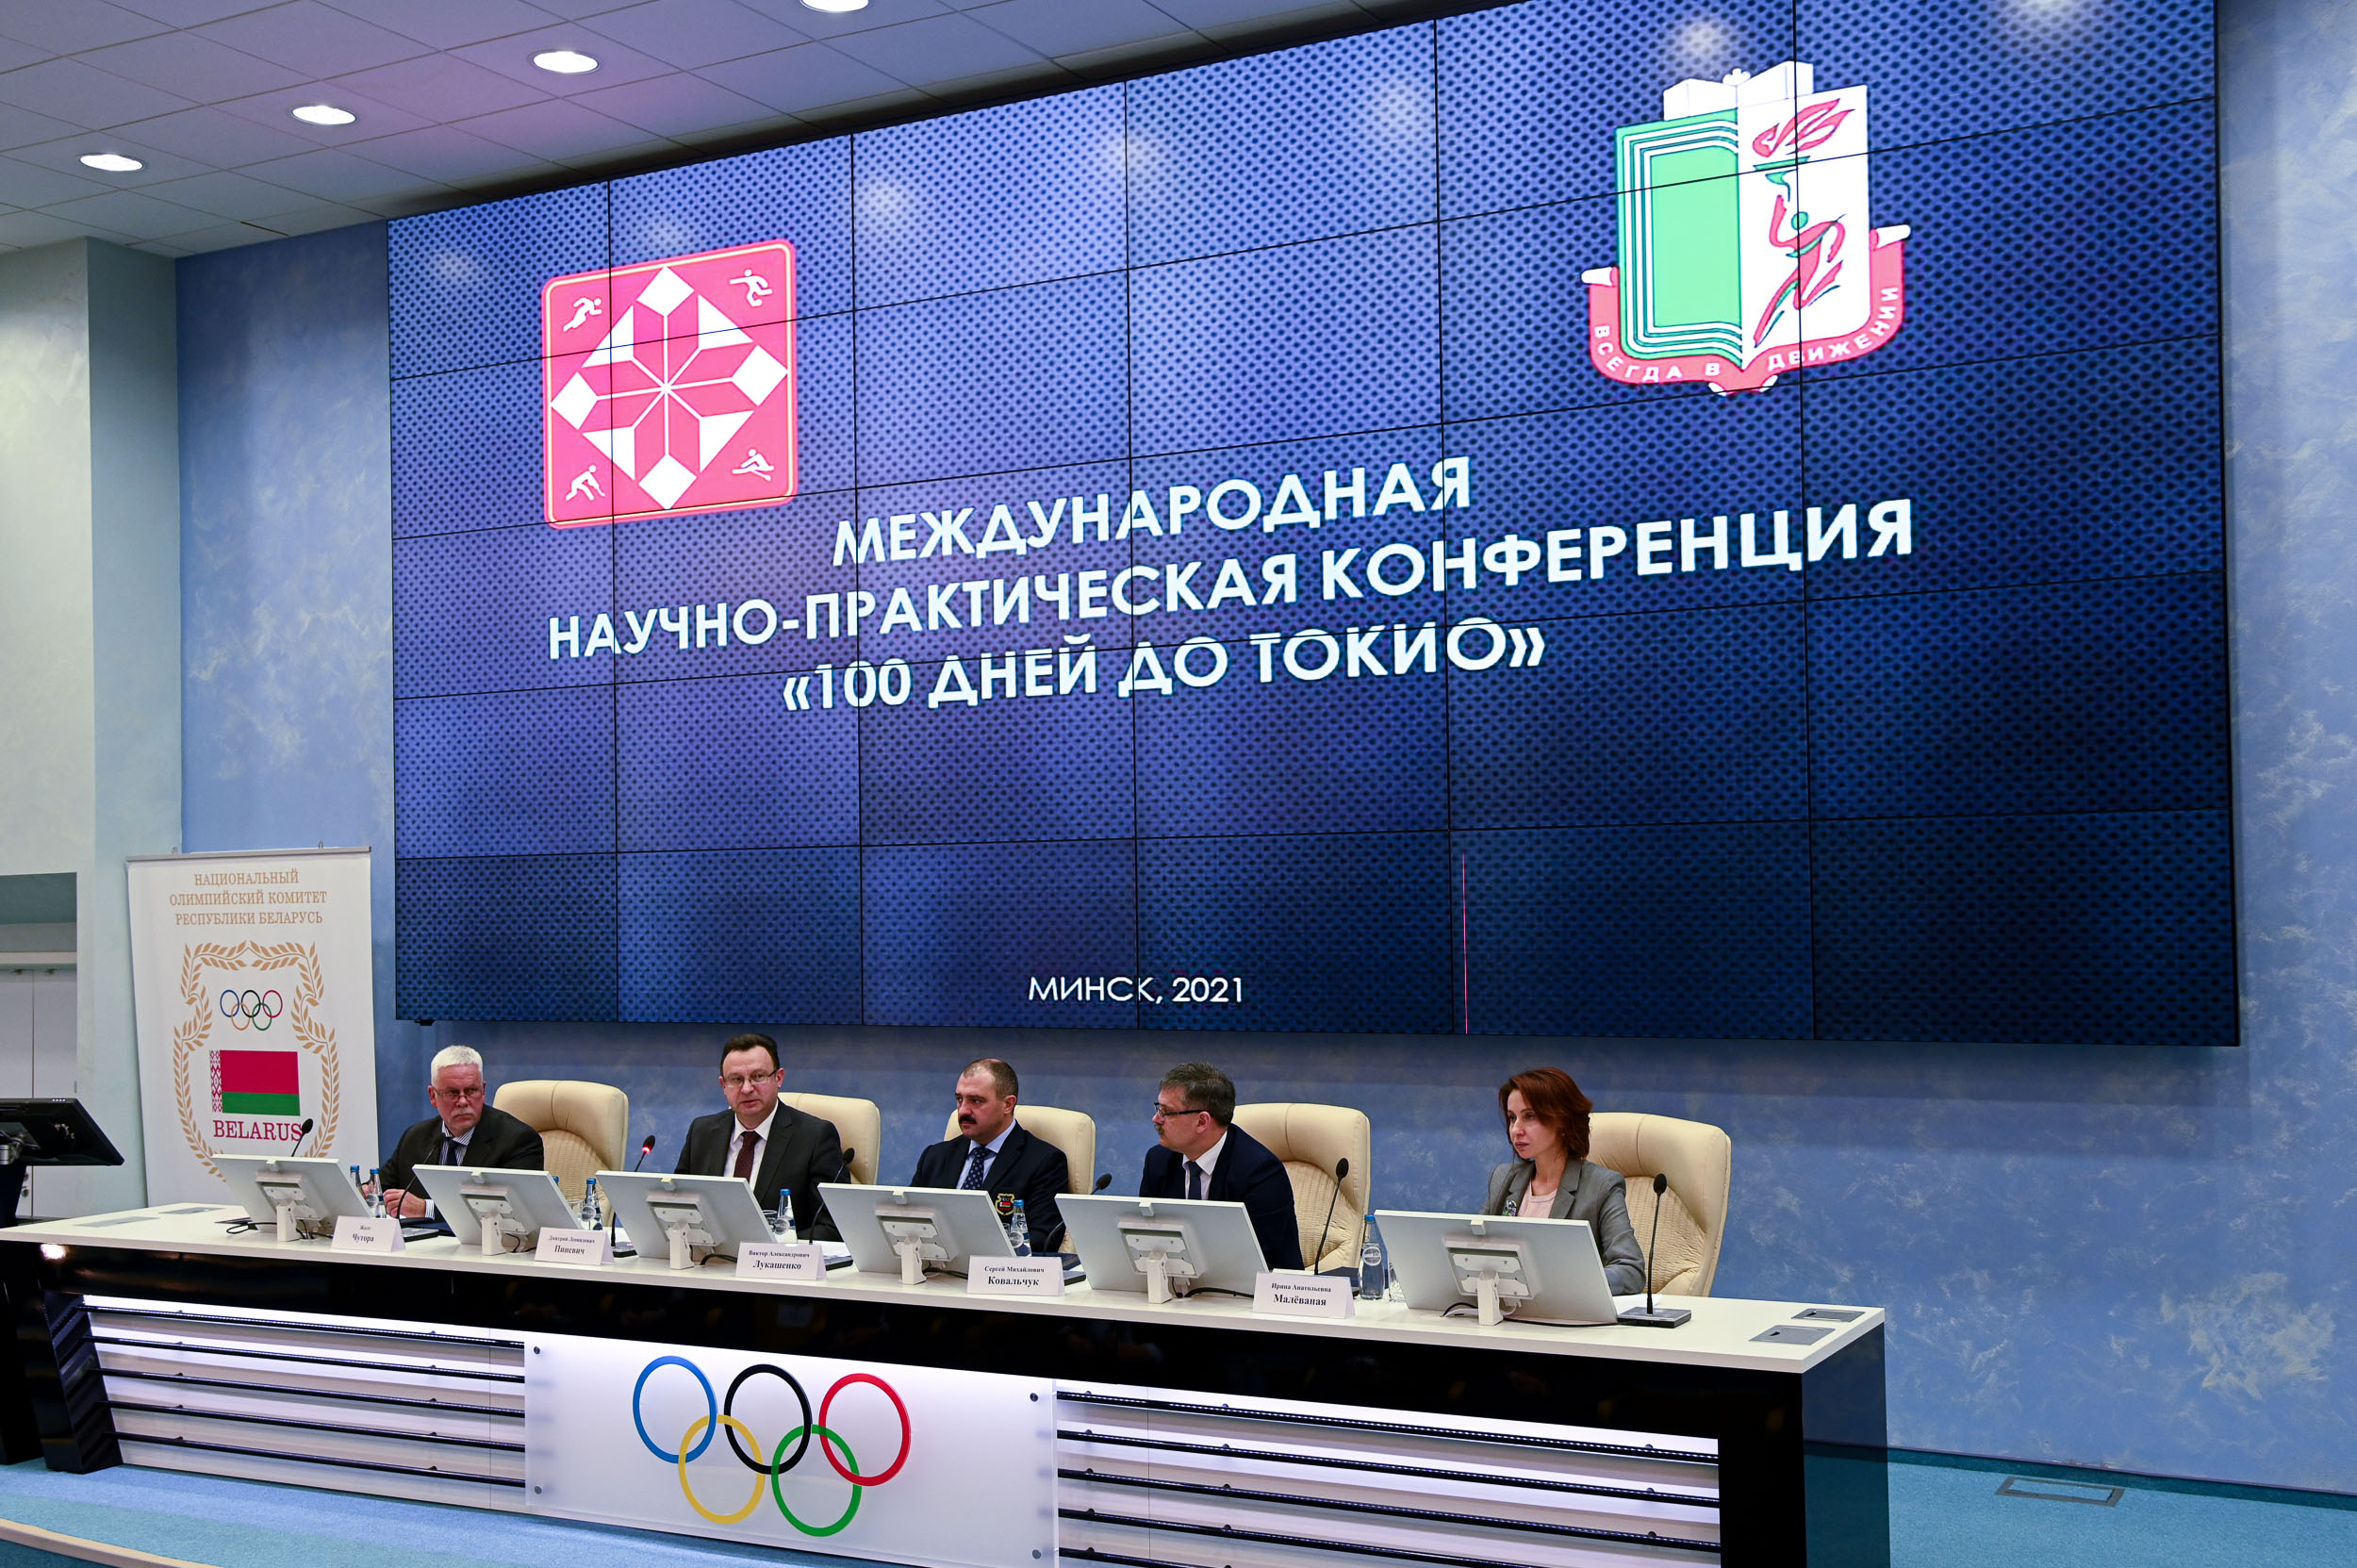 NOC hosts international conference dedicated to Tokyo Olympics 